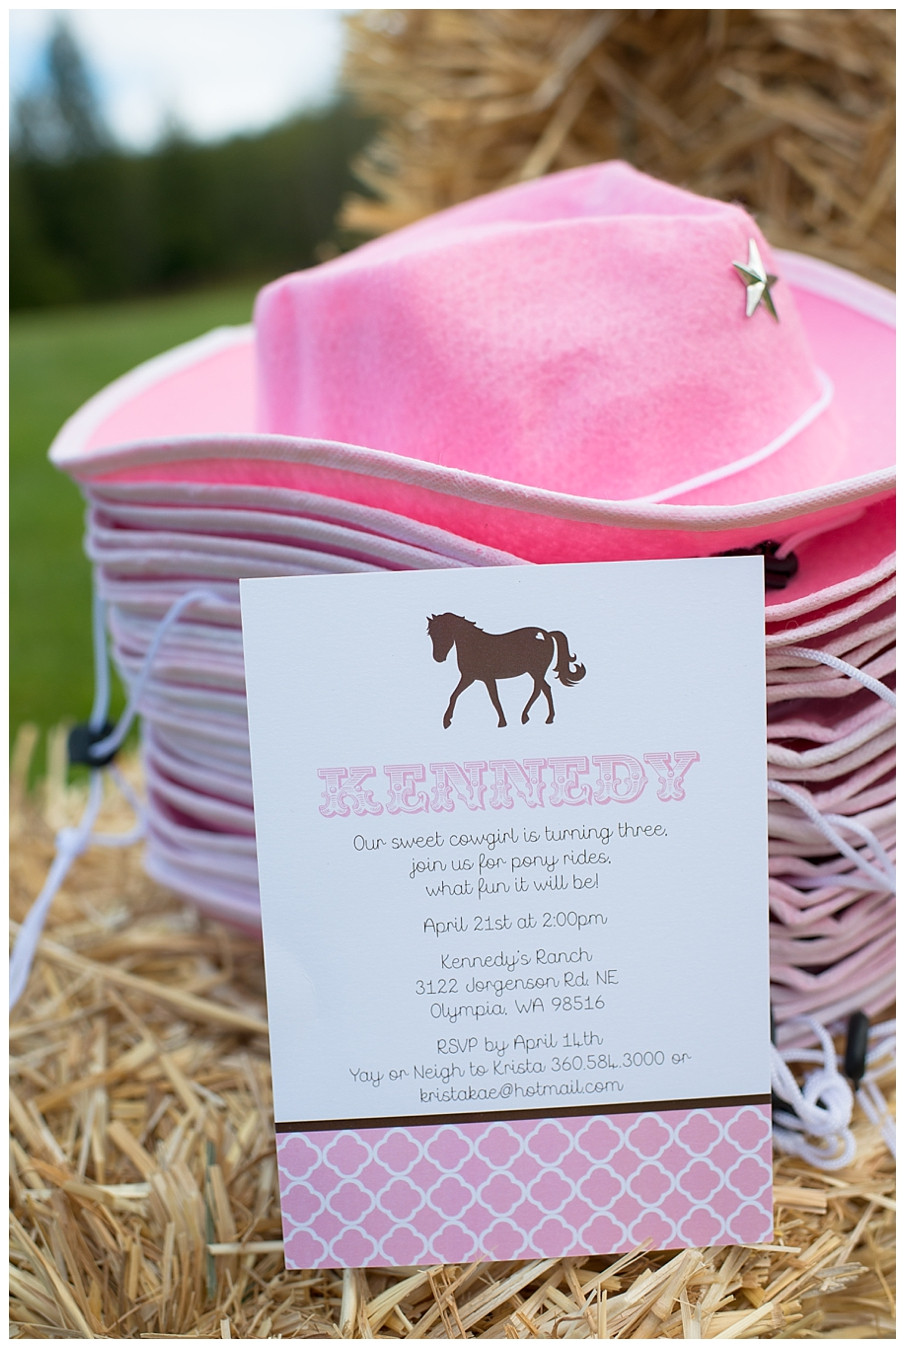 Pony Rides Birthday Party
 A Pink and Brown Pony Party Hoopla Events